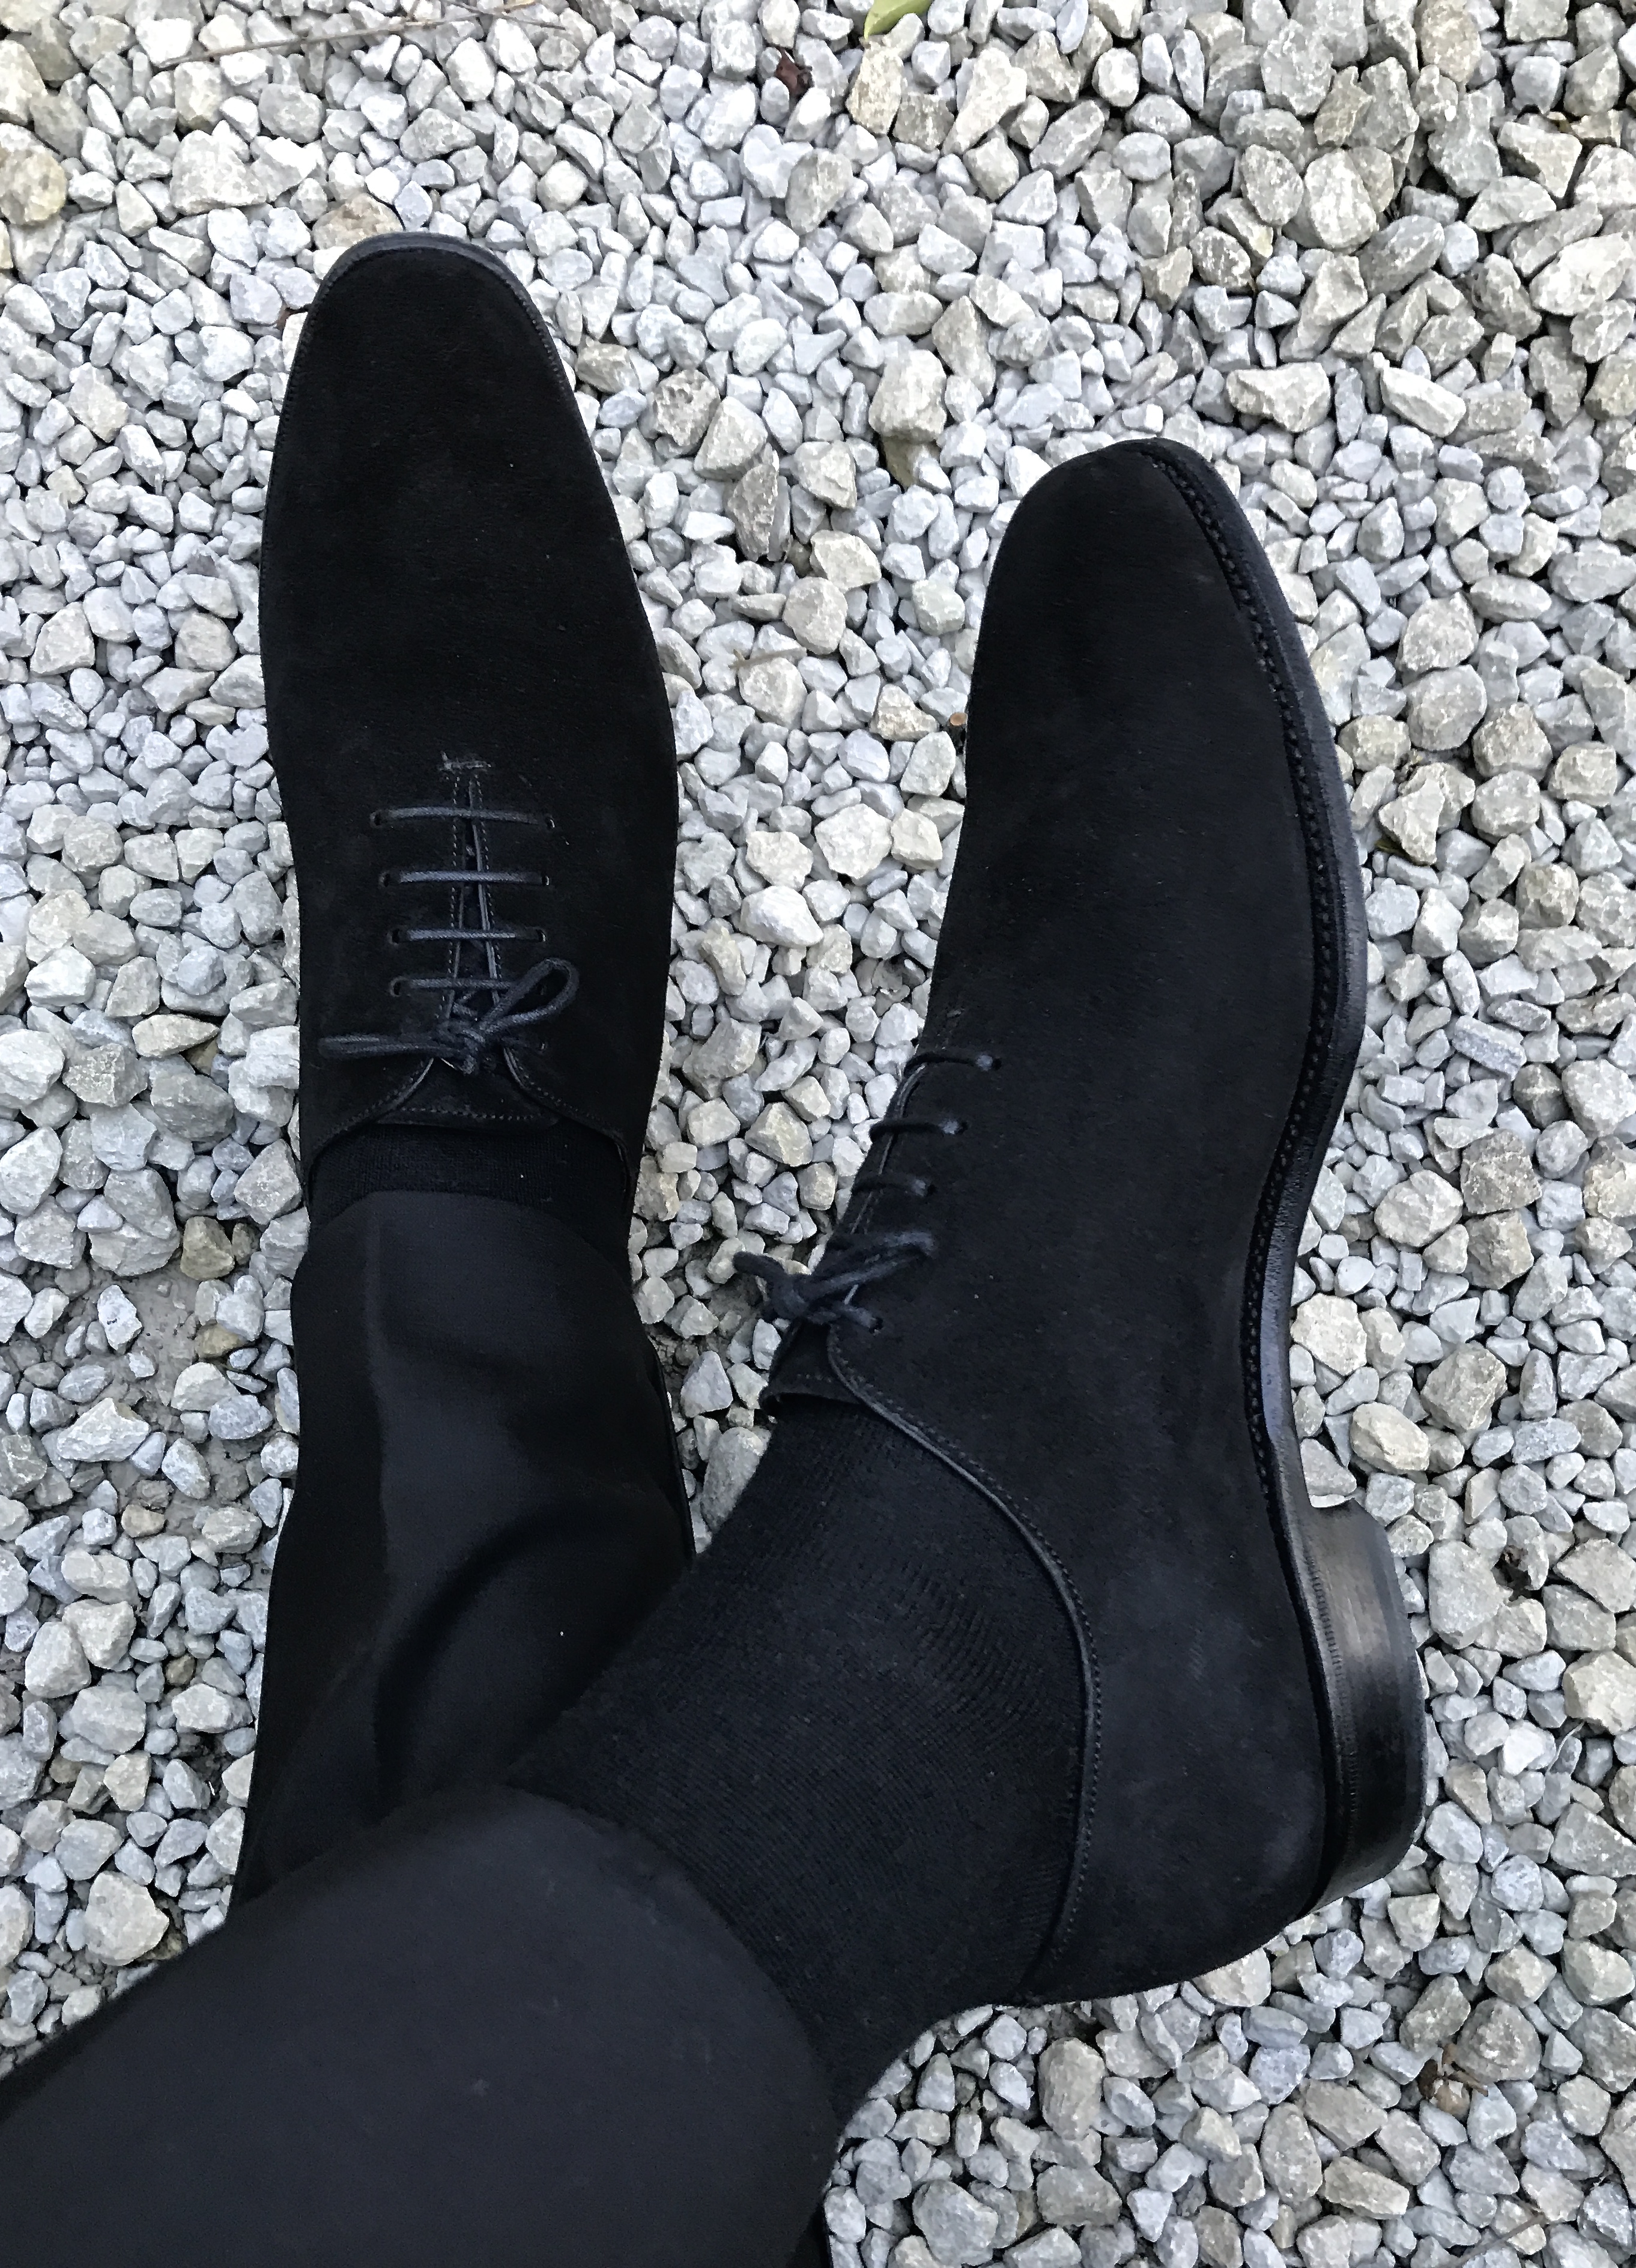 suede shoes - post 'em here! | Page 174 | Styleforum